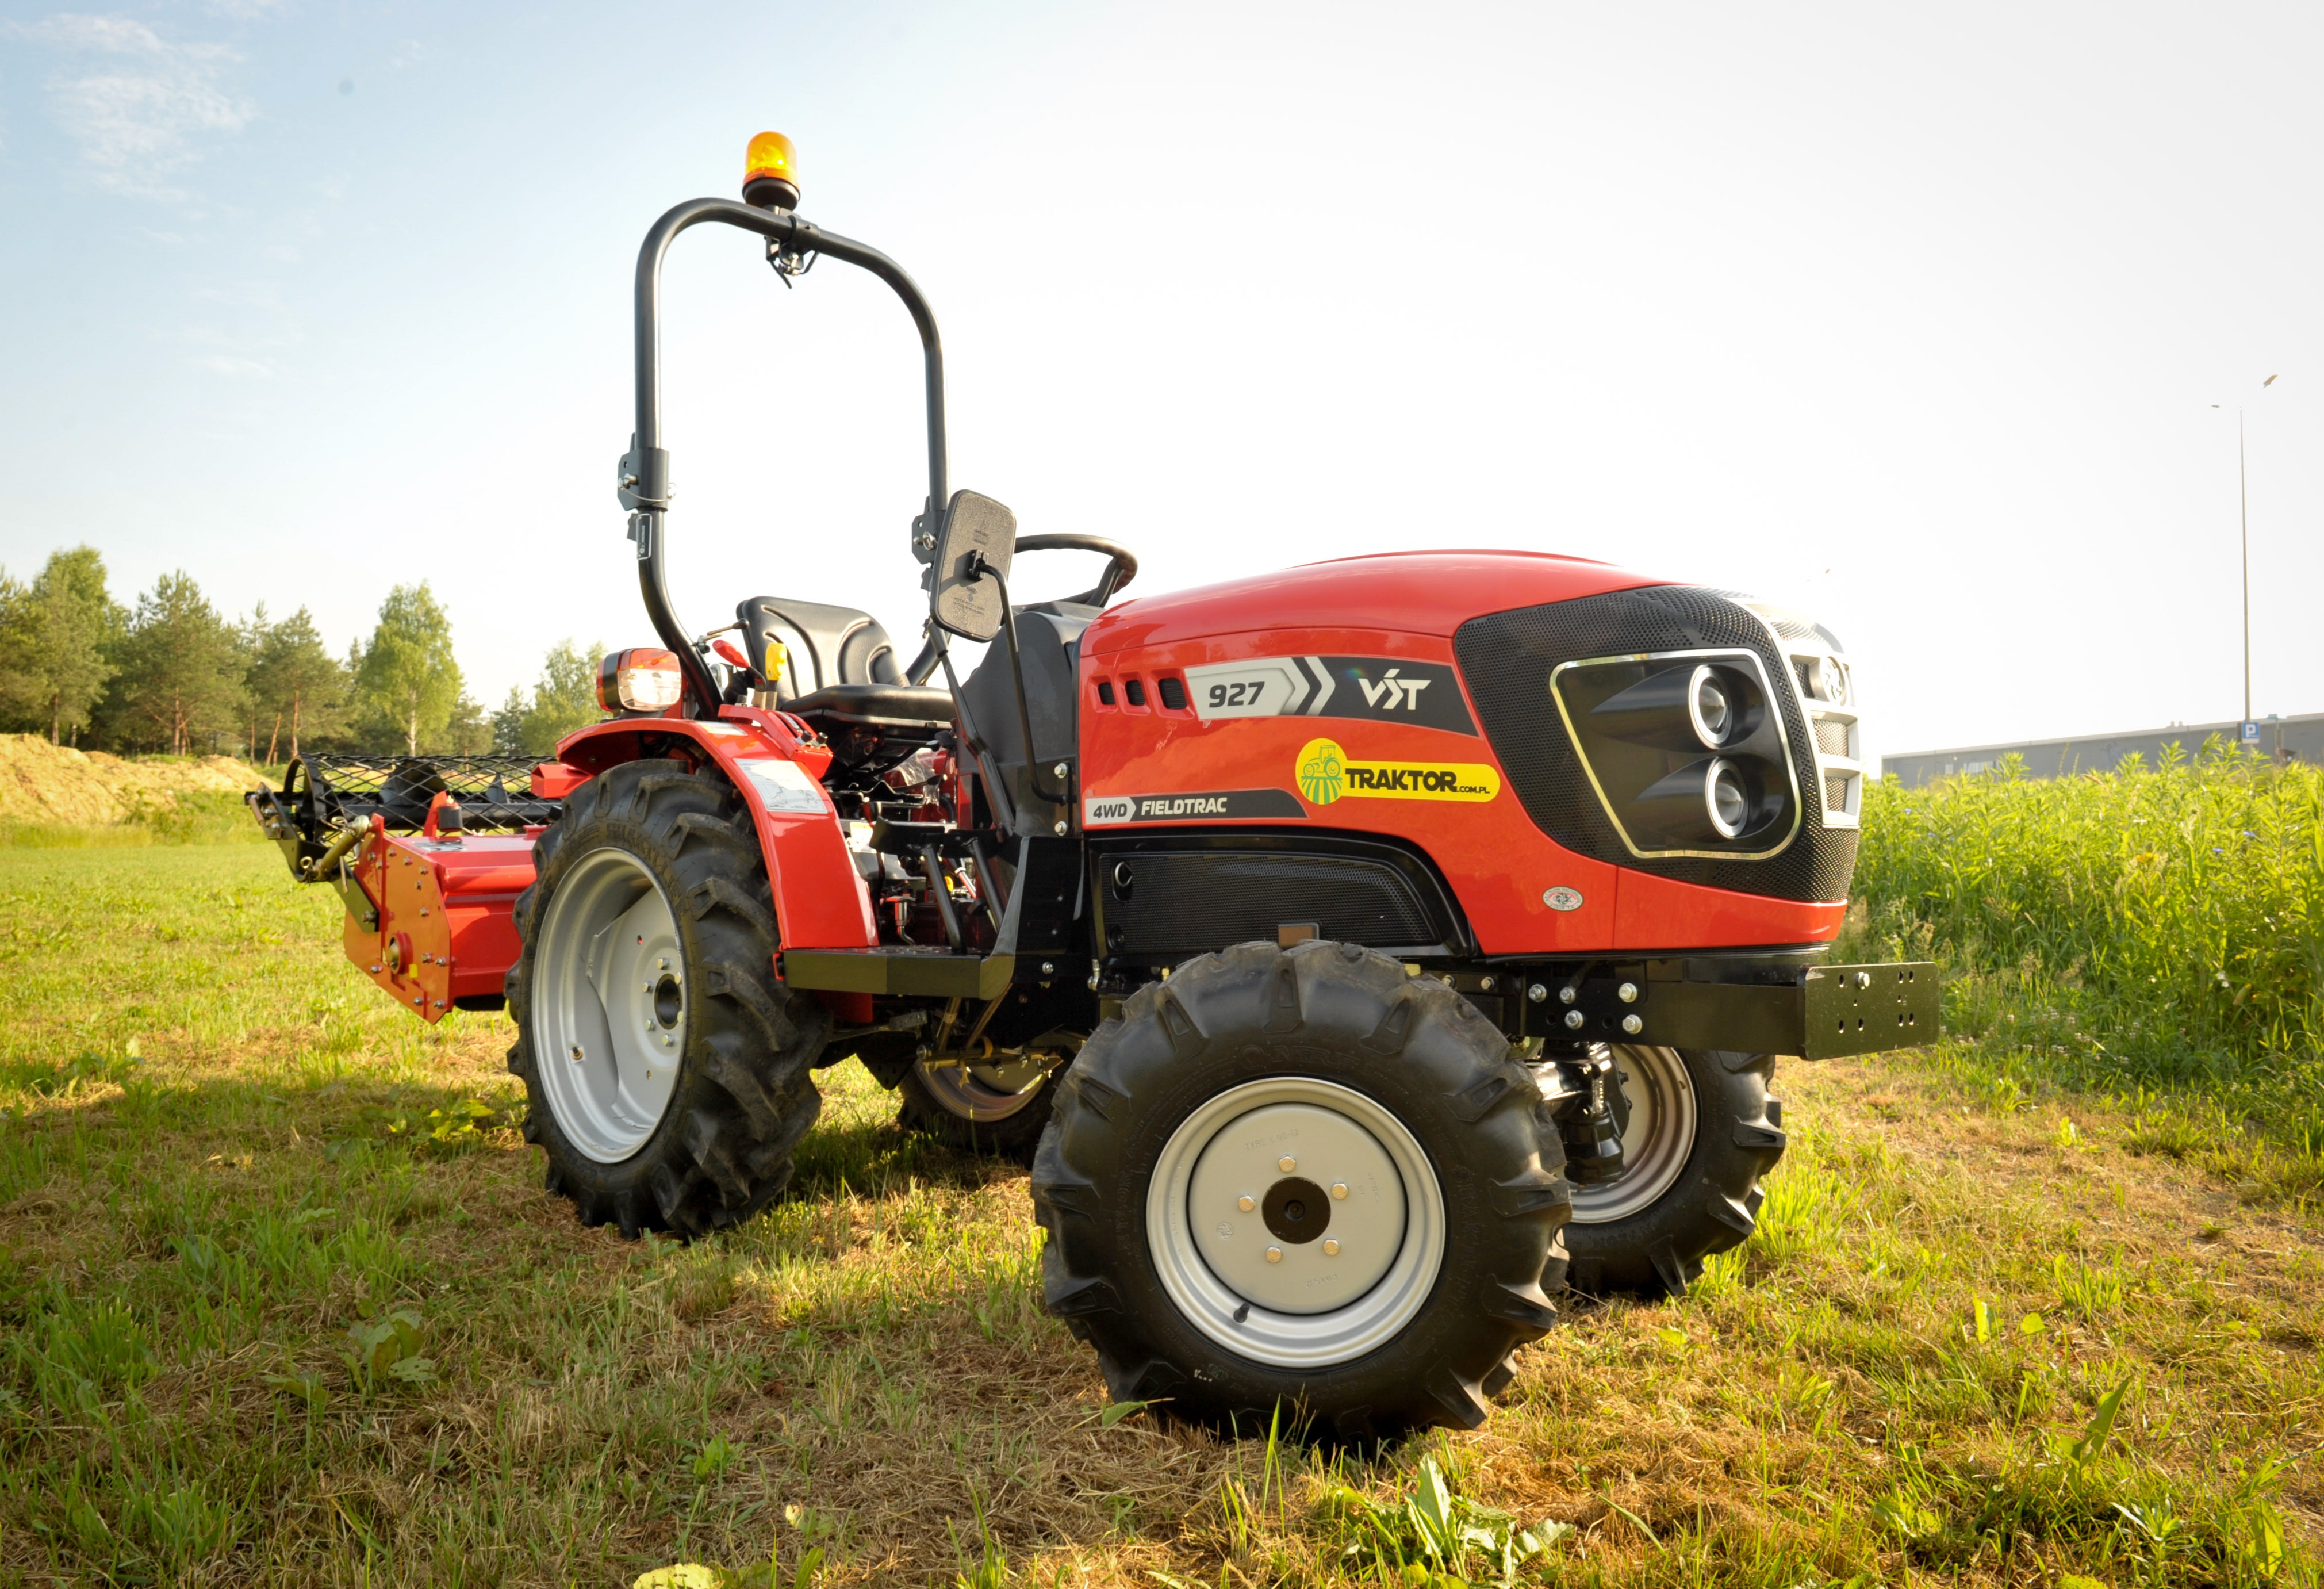 A new incarnation of one of the best compact tractors, Mitsubishi VST 927D Fieldtrac